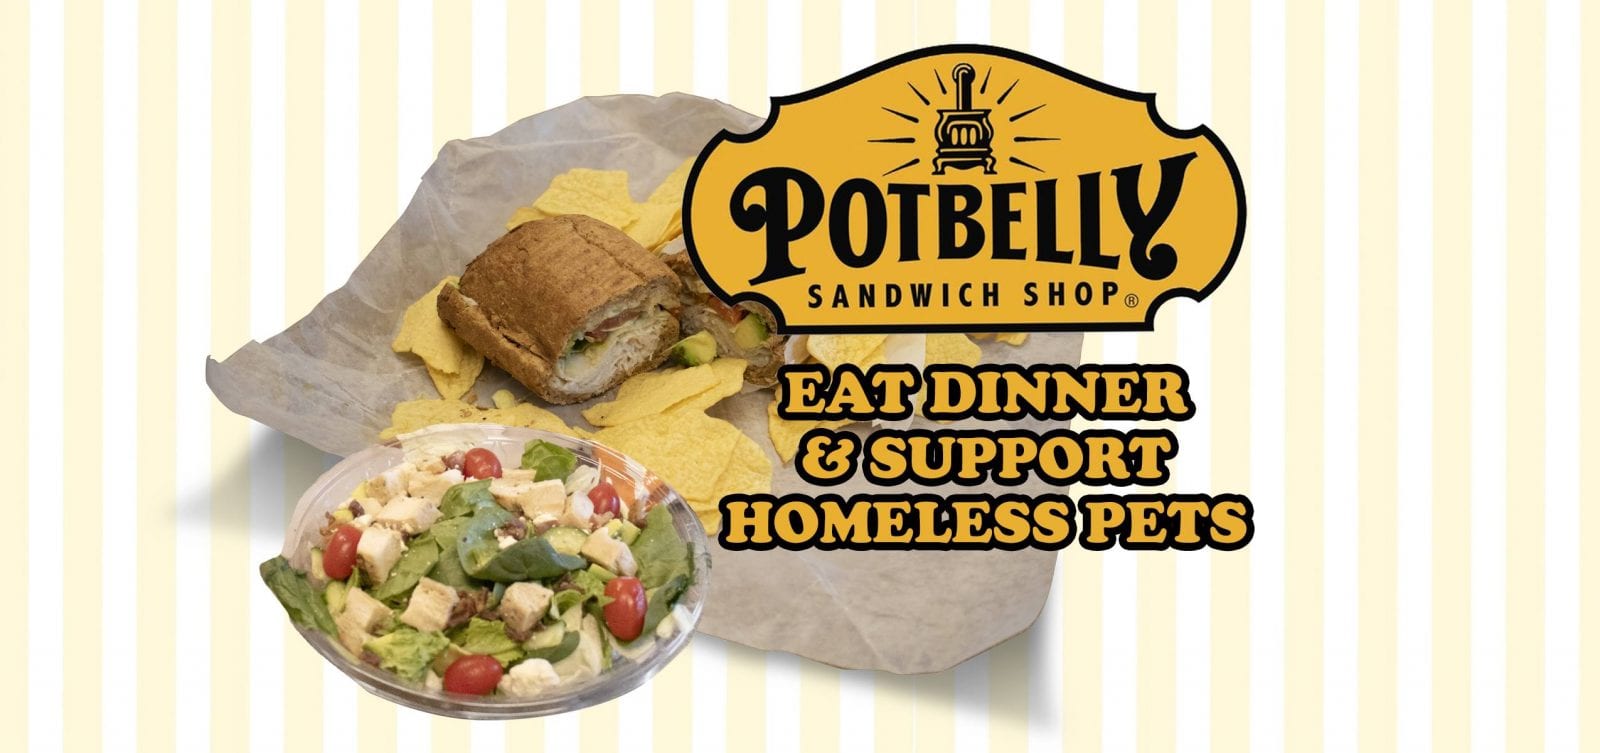 graphic - potbelly sandwhich shop banner ad